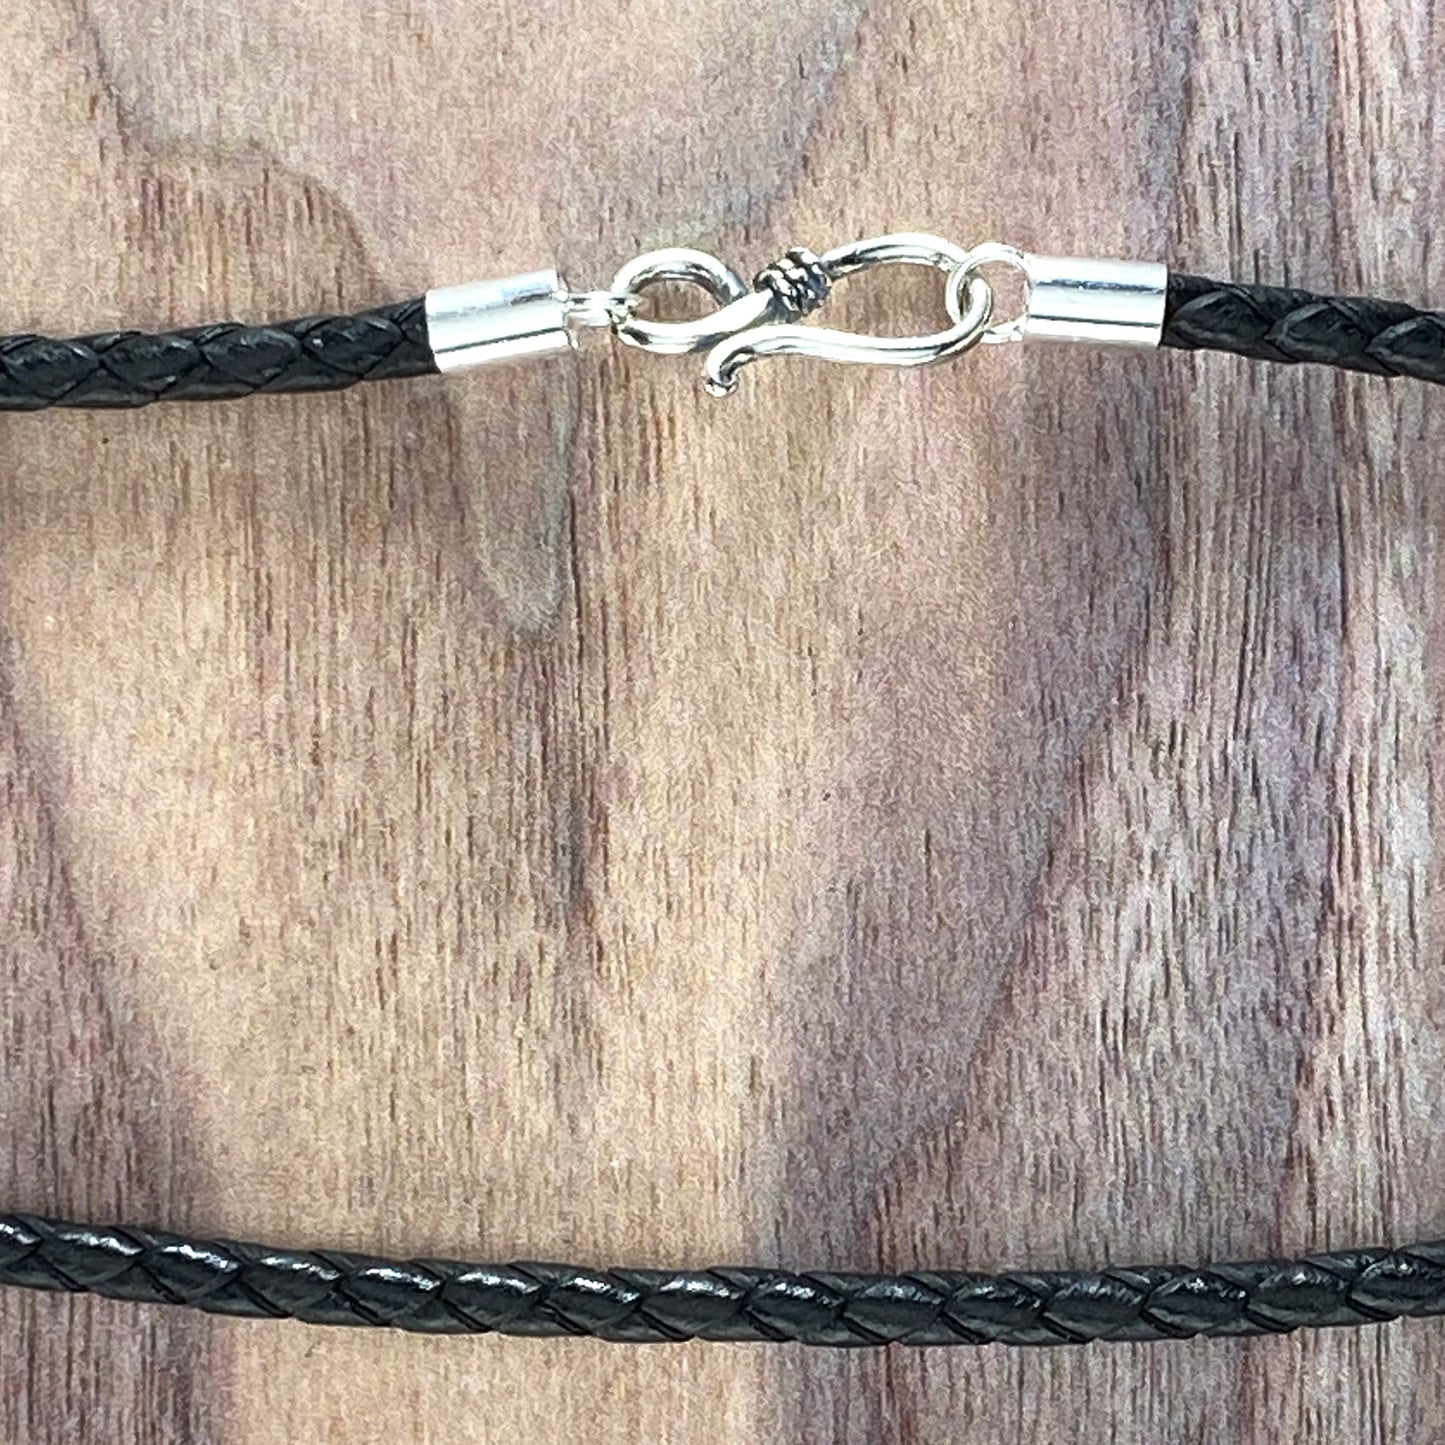 Braided Leather Cord Necklace - Stone Treasures by The Lake